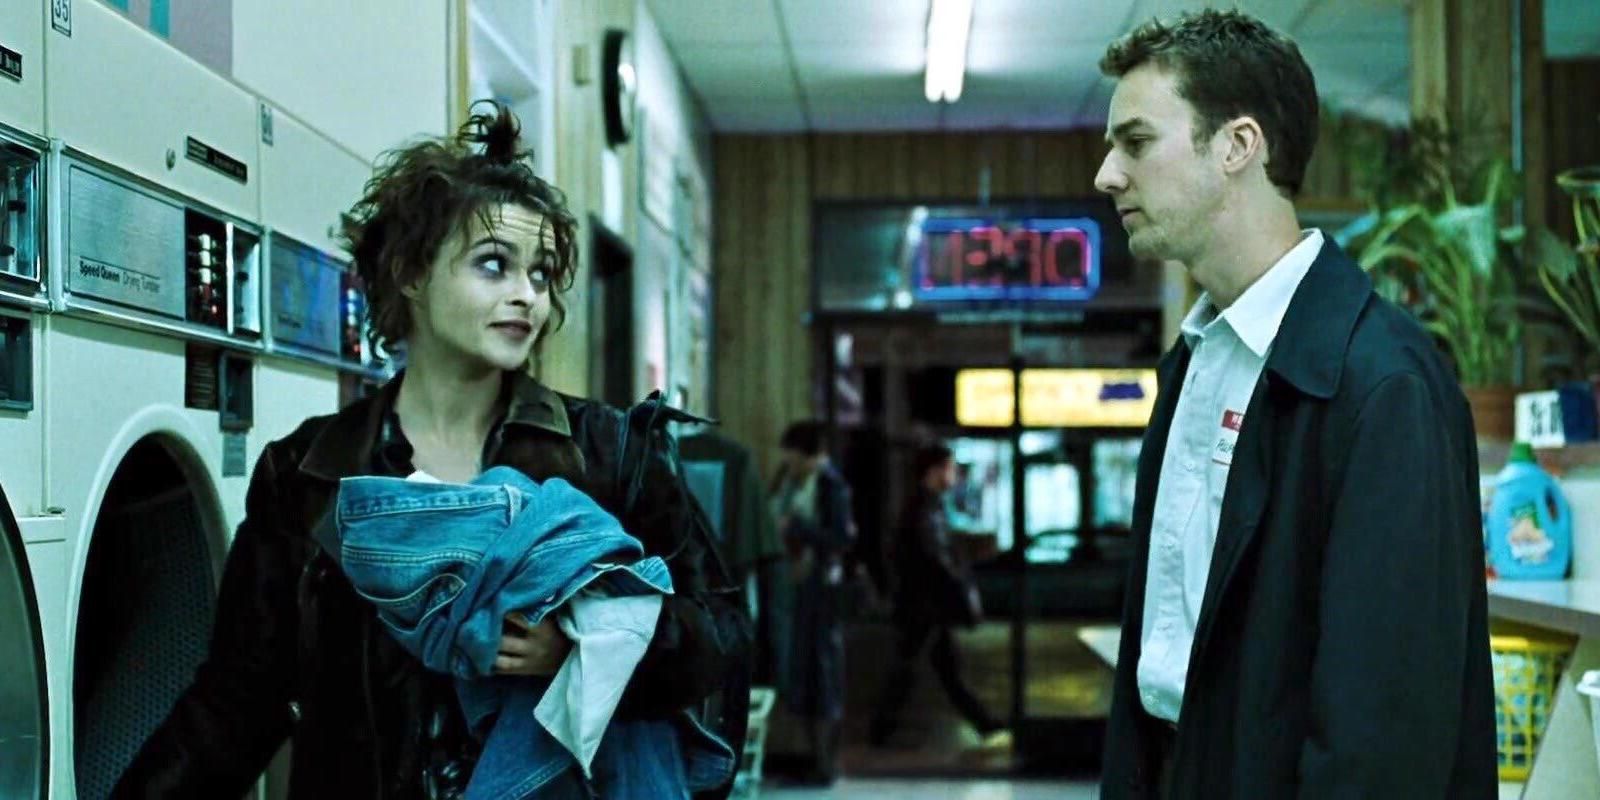 Marla and The Narrator at the laundromat in Fight Club.